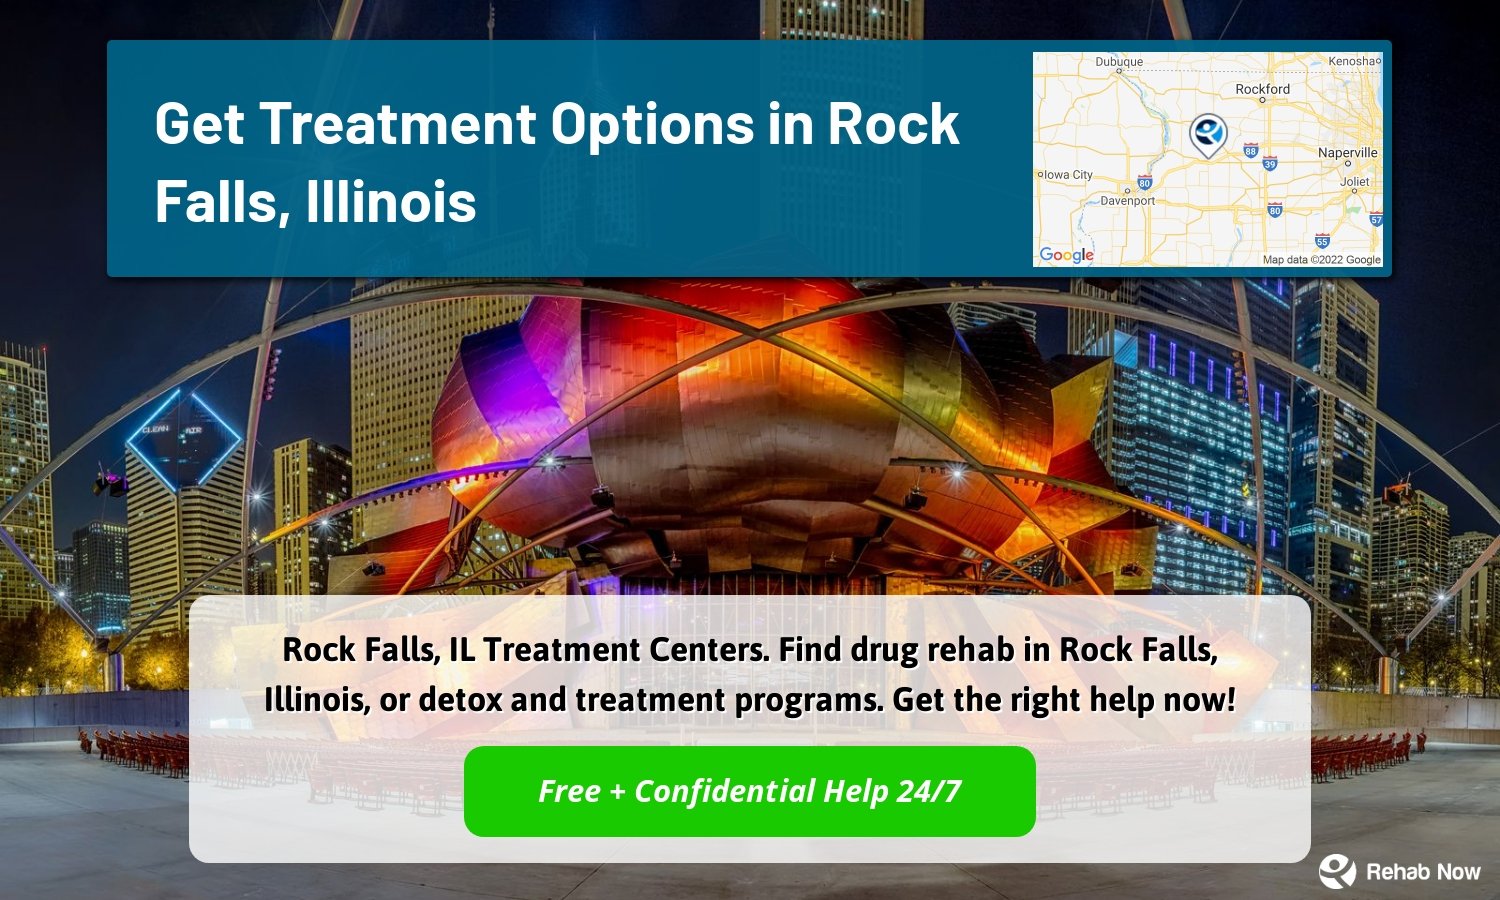 Rock Falls, IL Treatment Centers. Find drug rehab in Rock Falls, Illinois, or detox and treatment programs. Get the right help now!